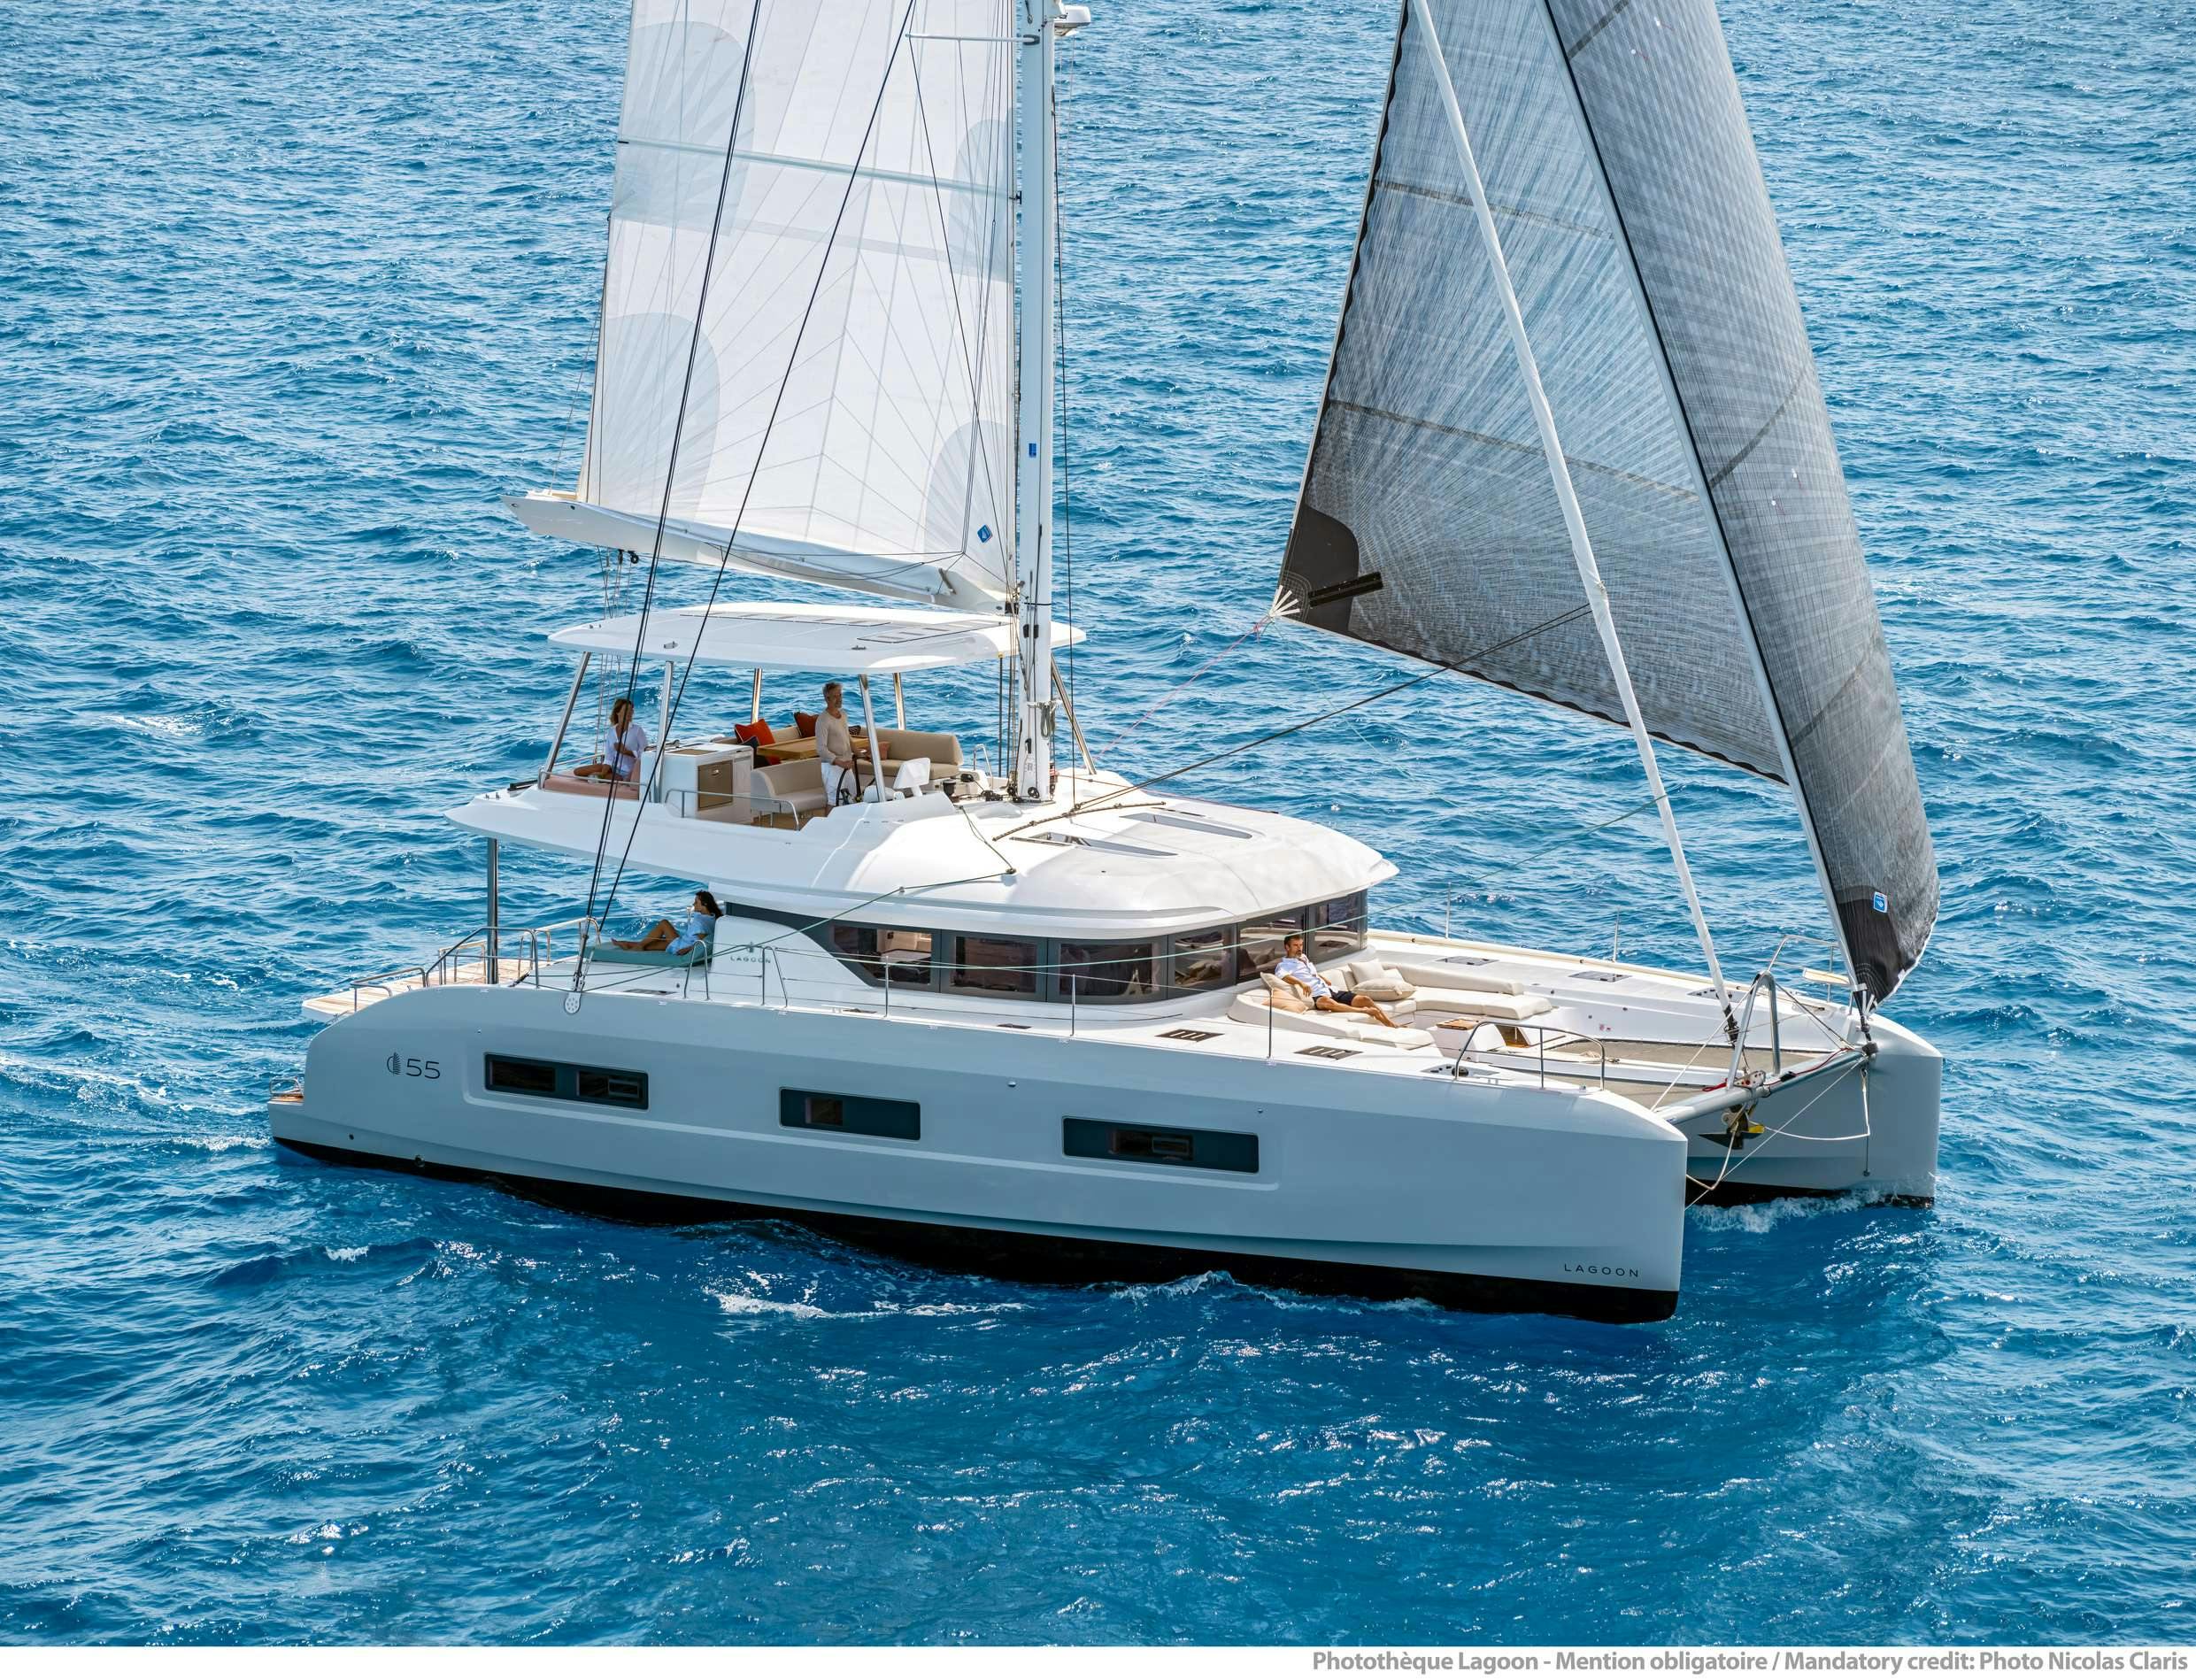 VALIUM 55 - Yacht Charter Kanistro & Boat hire in Greece 1